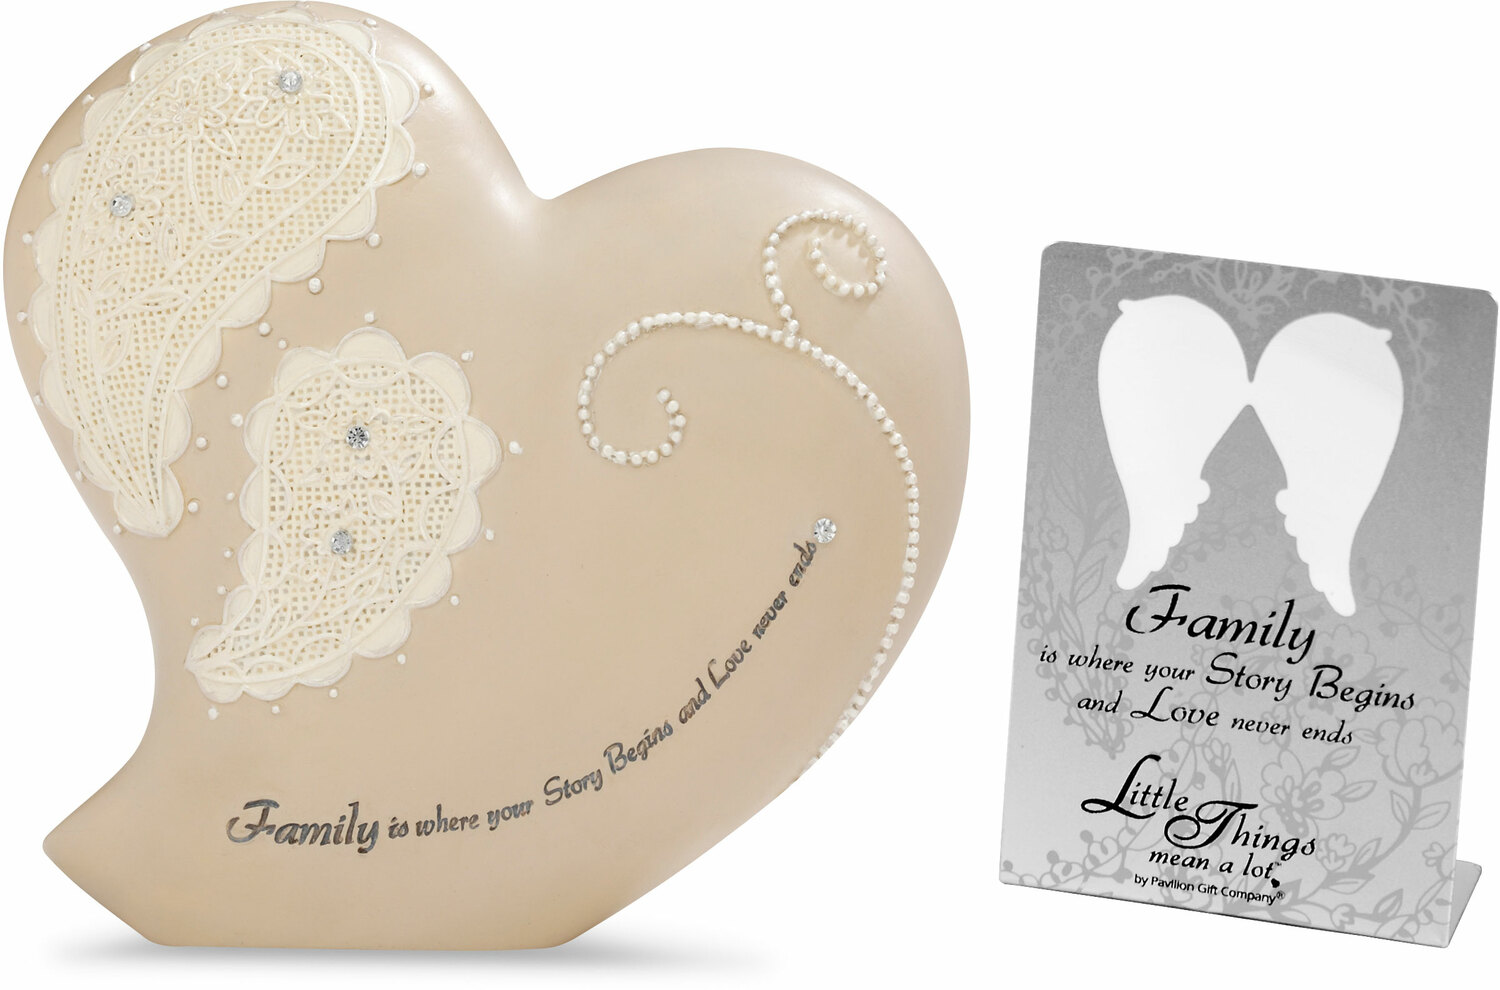 Family by Little Things Mean A Lot - Family - 4" Heart Self-Standing Plaque